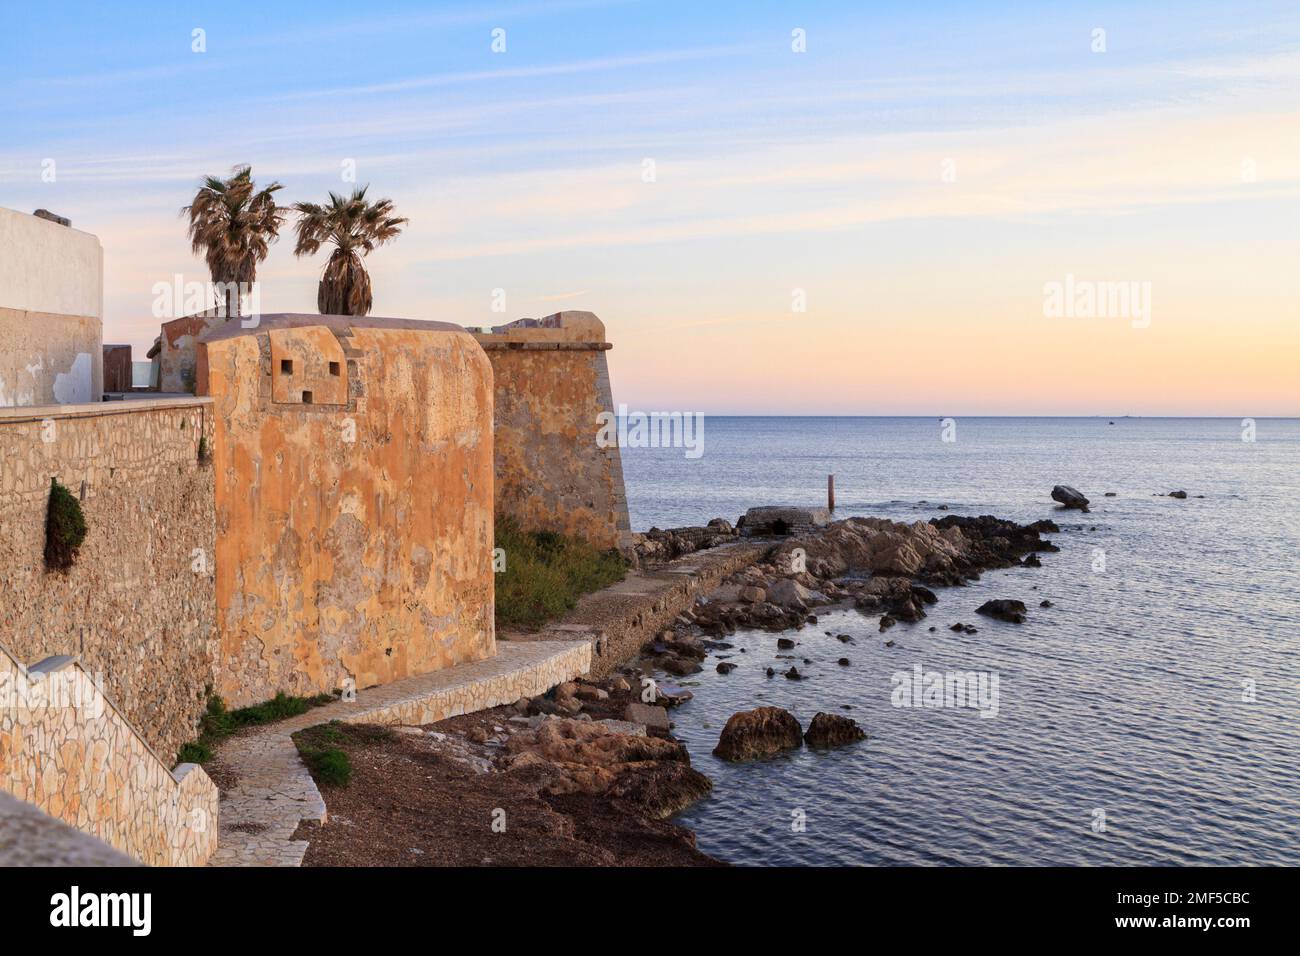 Seascape from the city walls (Bastione Conca) in Trapani, Italy Stock Photo